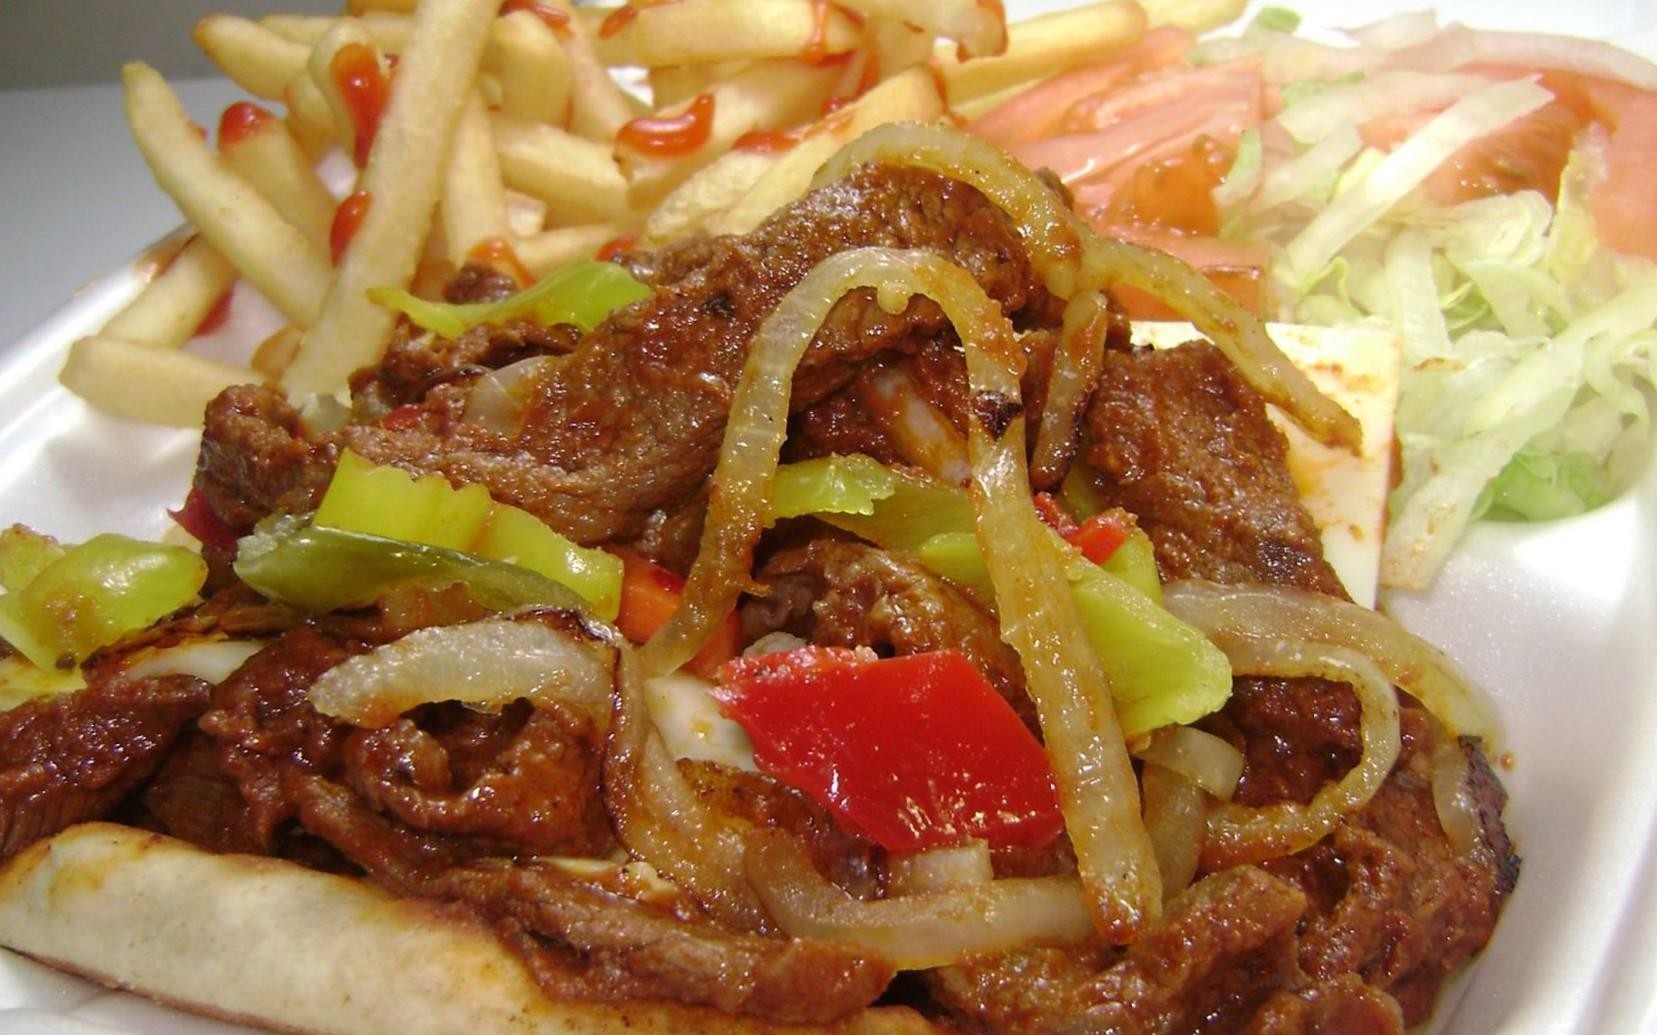 SPICY GYRO WITH FRIES